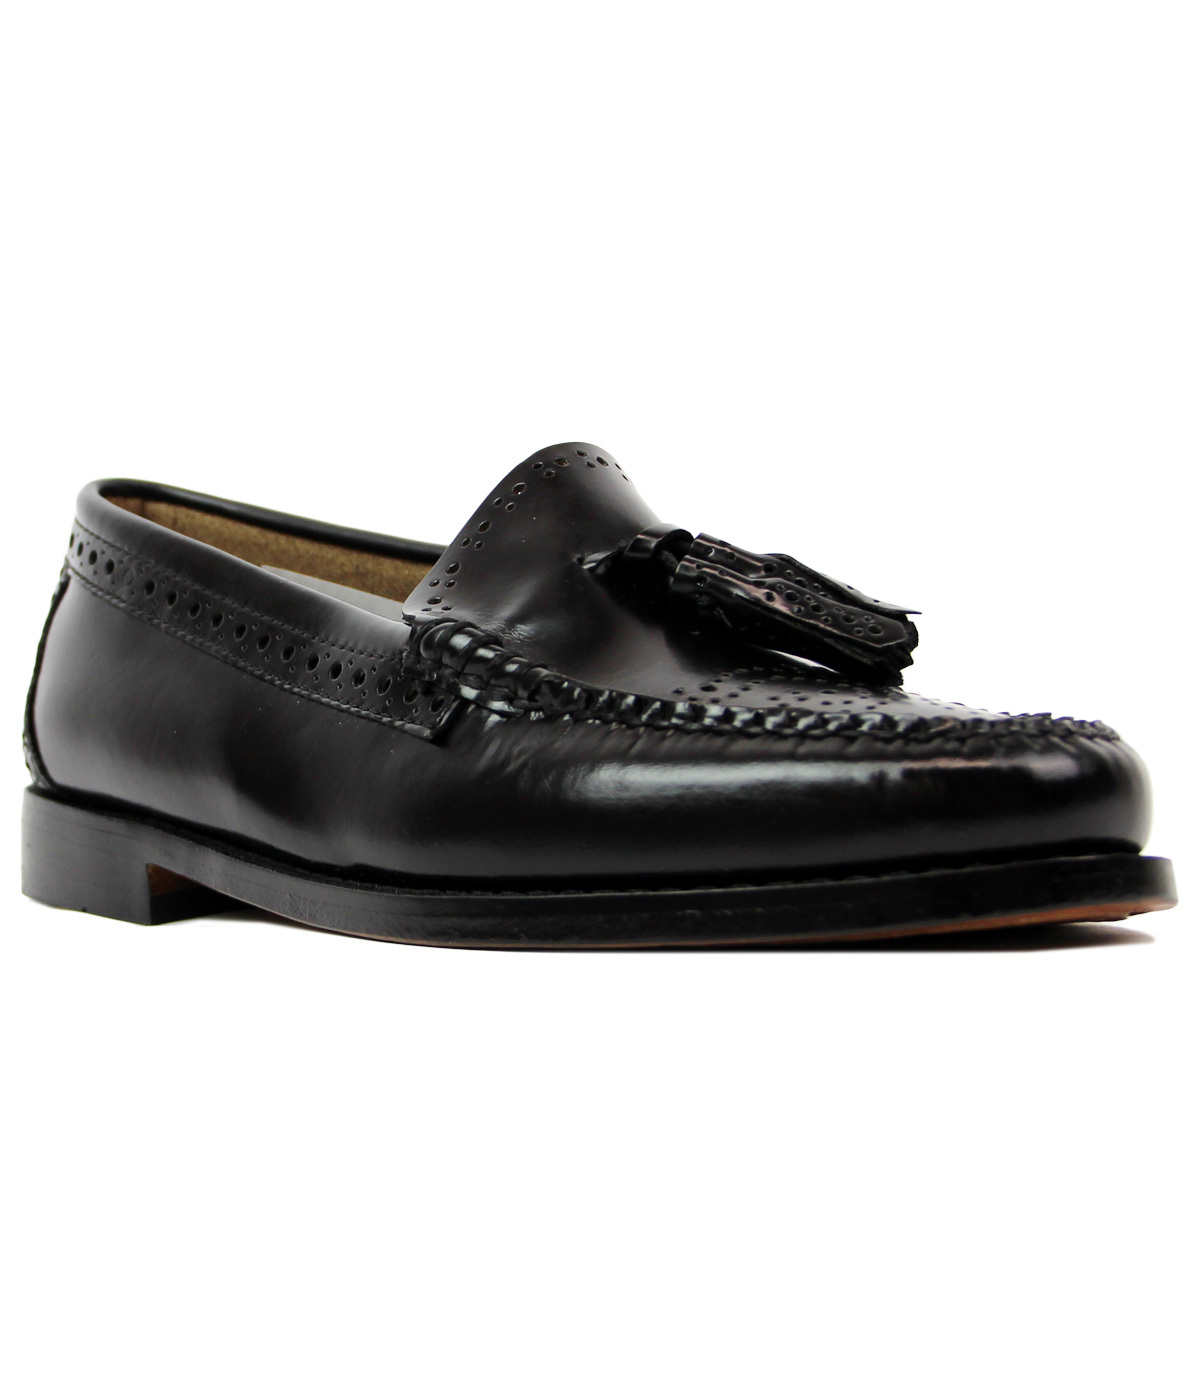 Estelle BASS WEEJUNS Retro Mod 60s Brogue Loafers